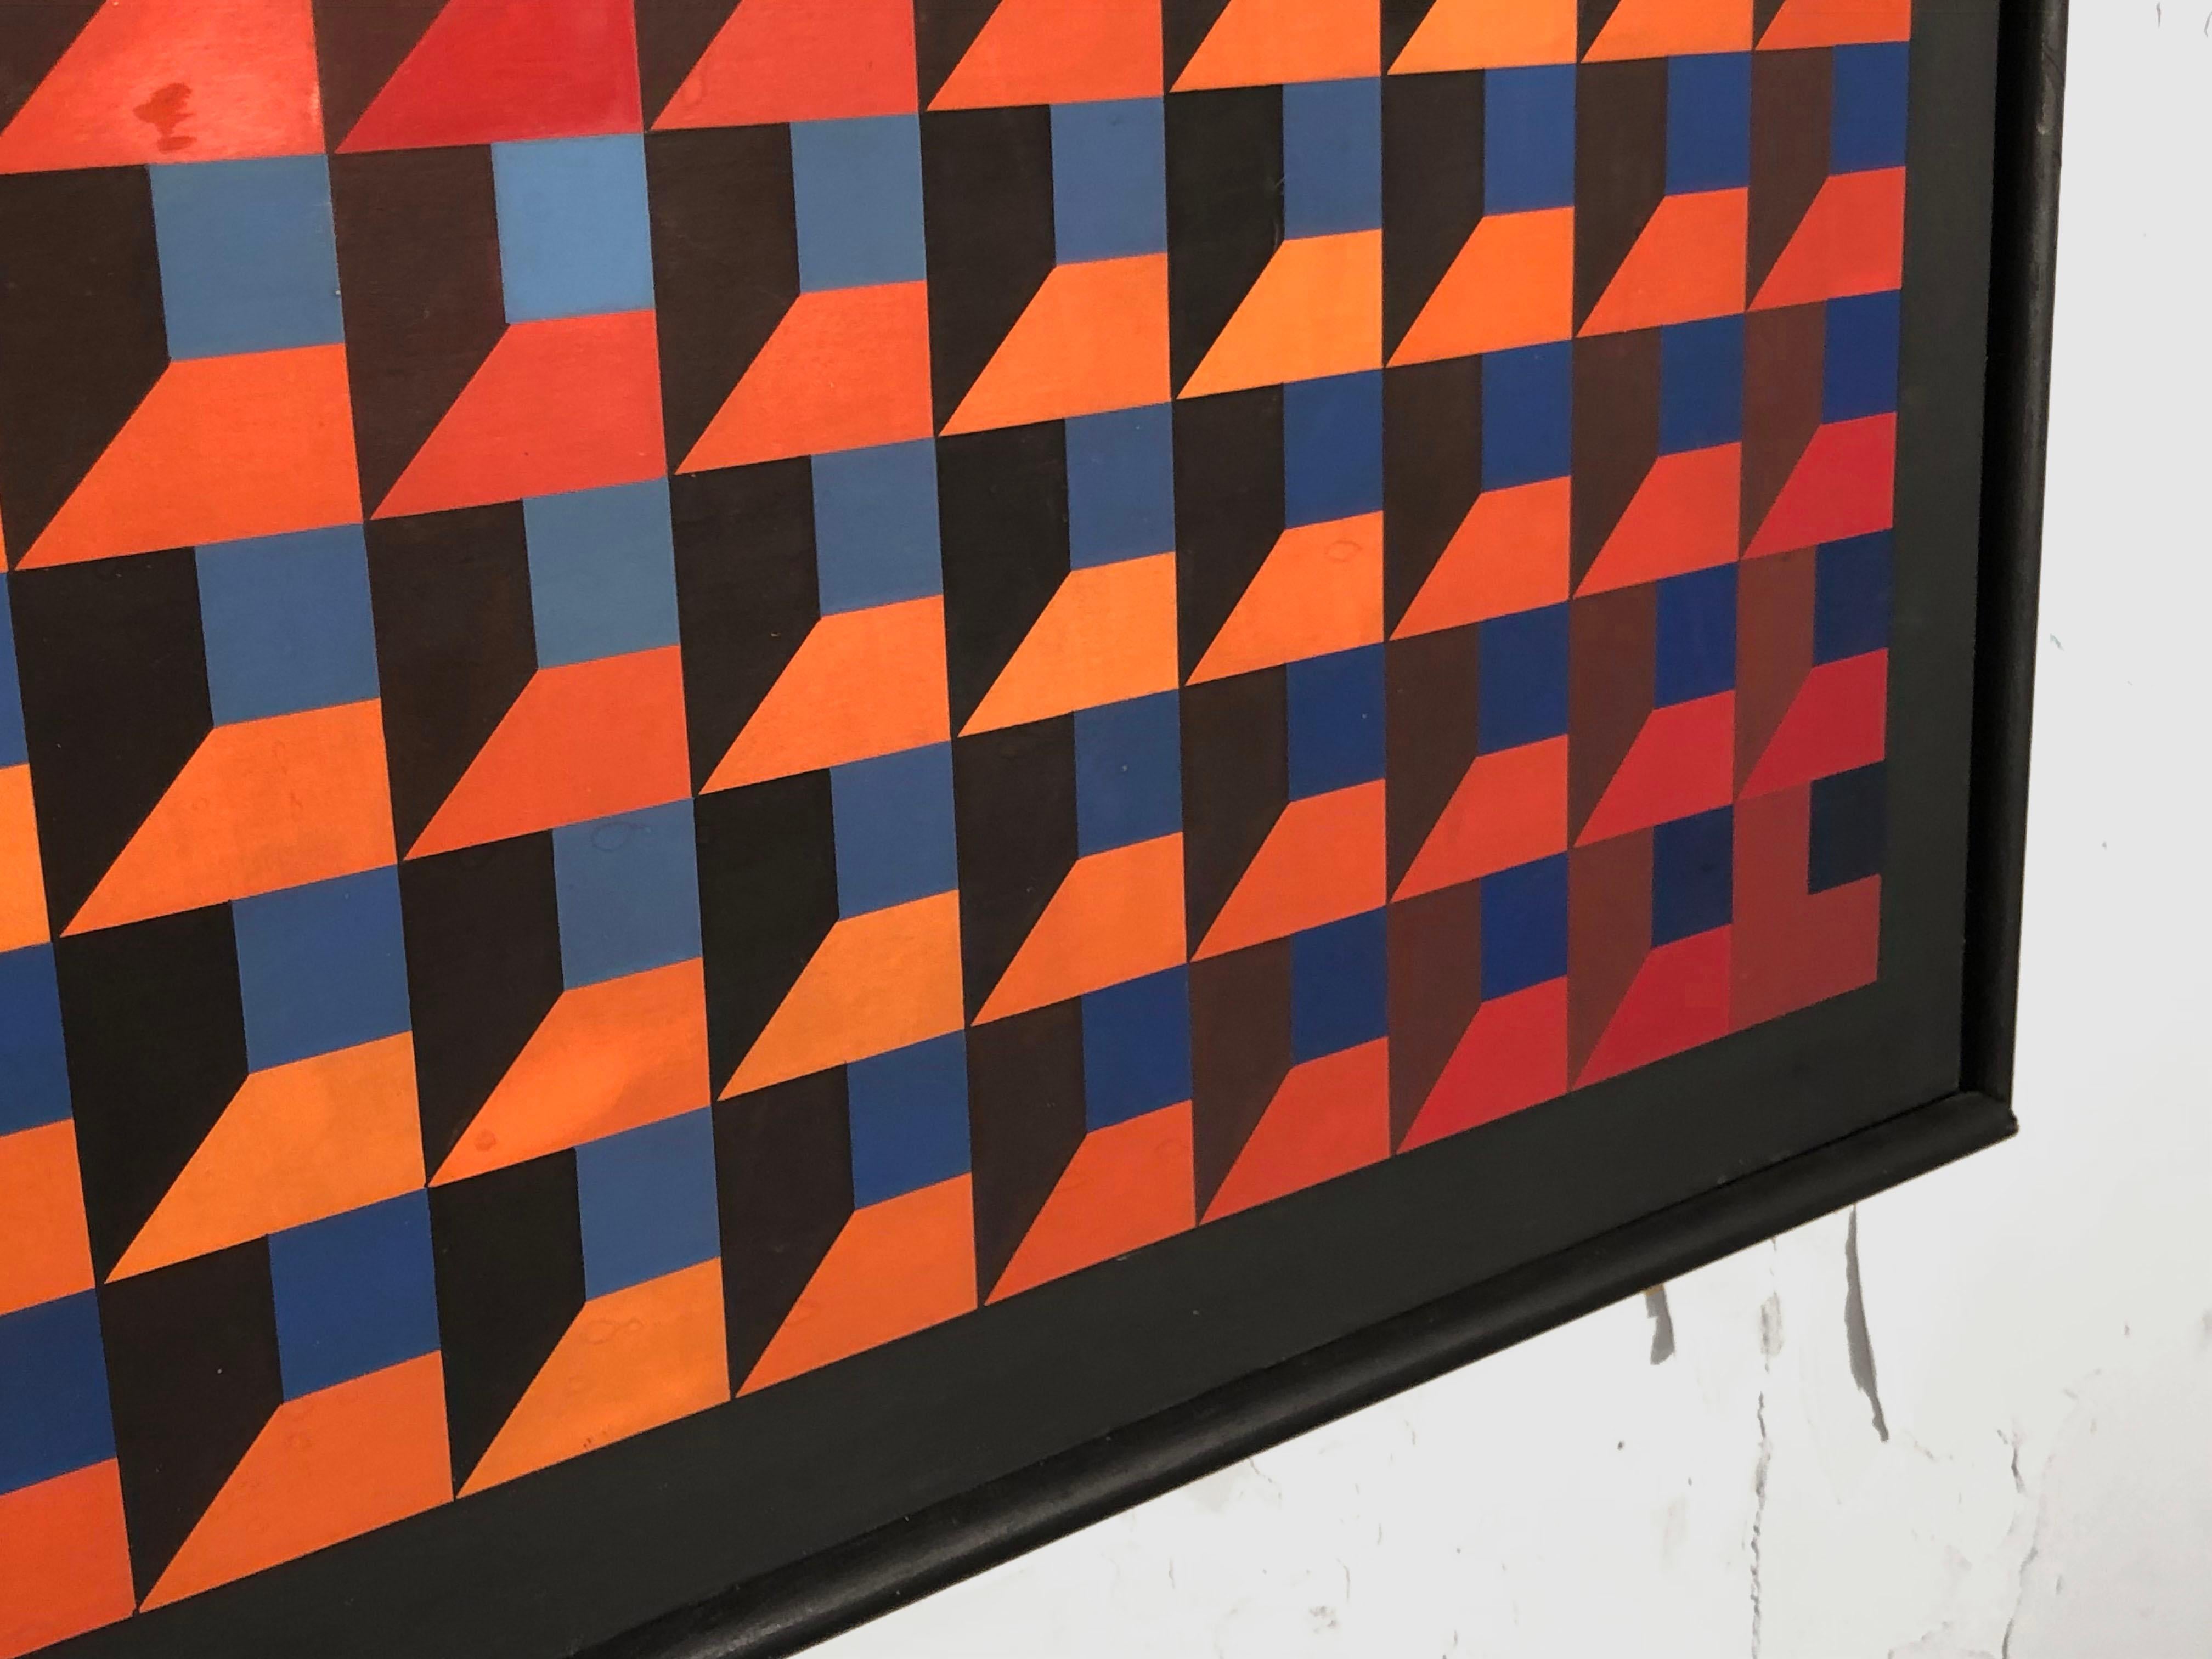 Wood An OP-ART KINETIC PAINTING on Panel by JEAN-PIERRE YVARAL VASARELY, France 1968 For Sale